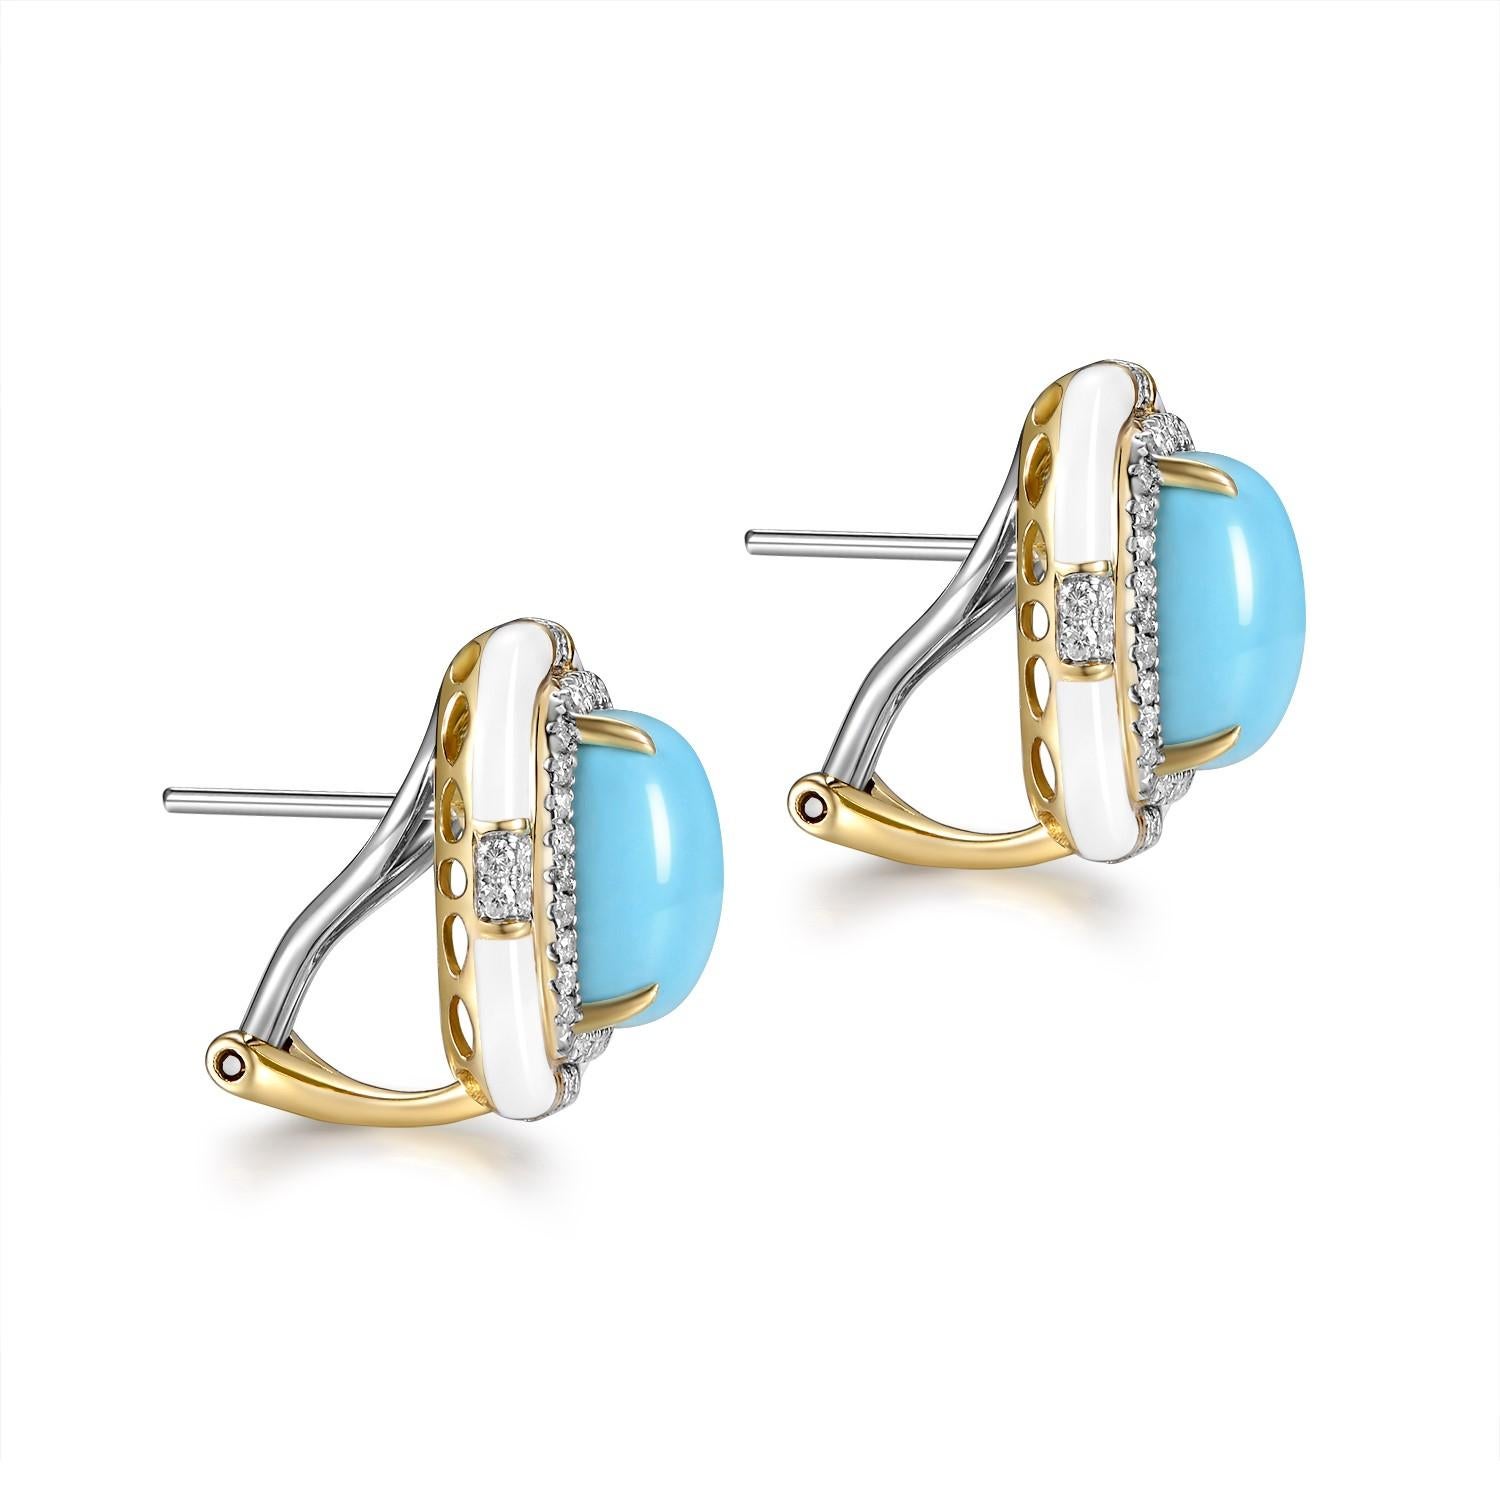 When it comes to precious stones, the Sleeping Beauty Turquoise stands apart with its entrancing blue hue, reminiscent of a serene and cloudless sky. This particular pair of earrings seamlessly marries this gem's splendor with the radiant sparkle of